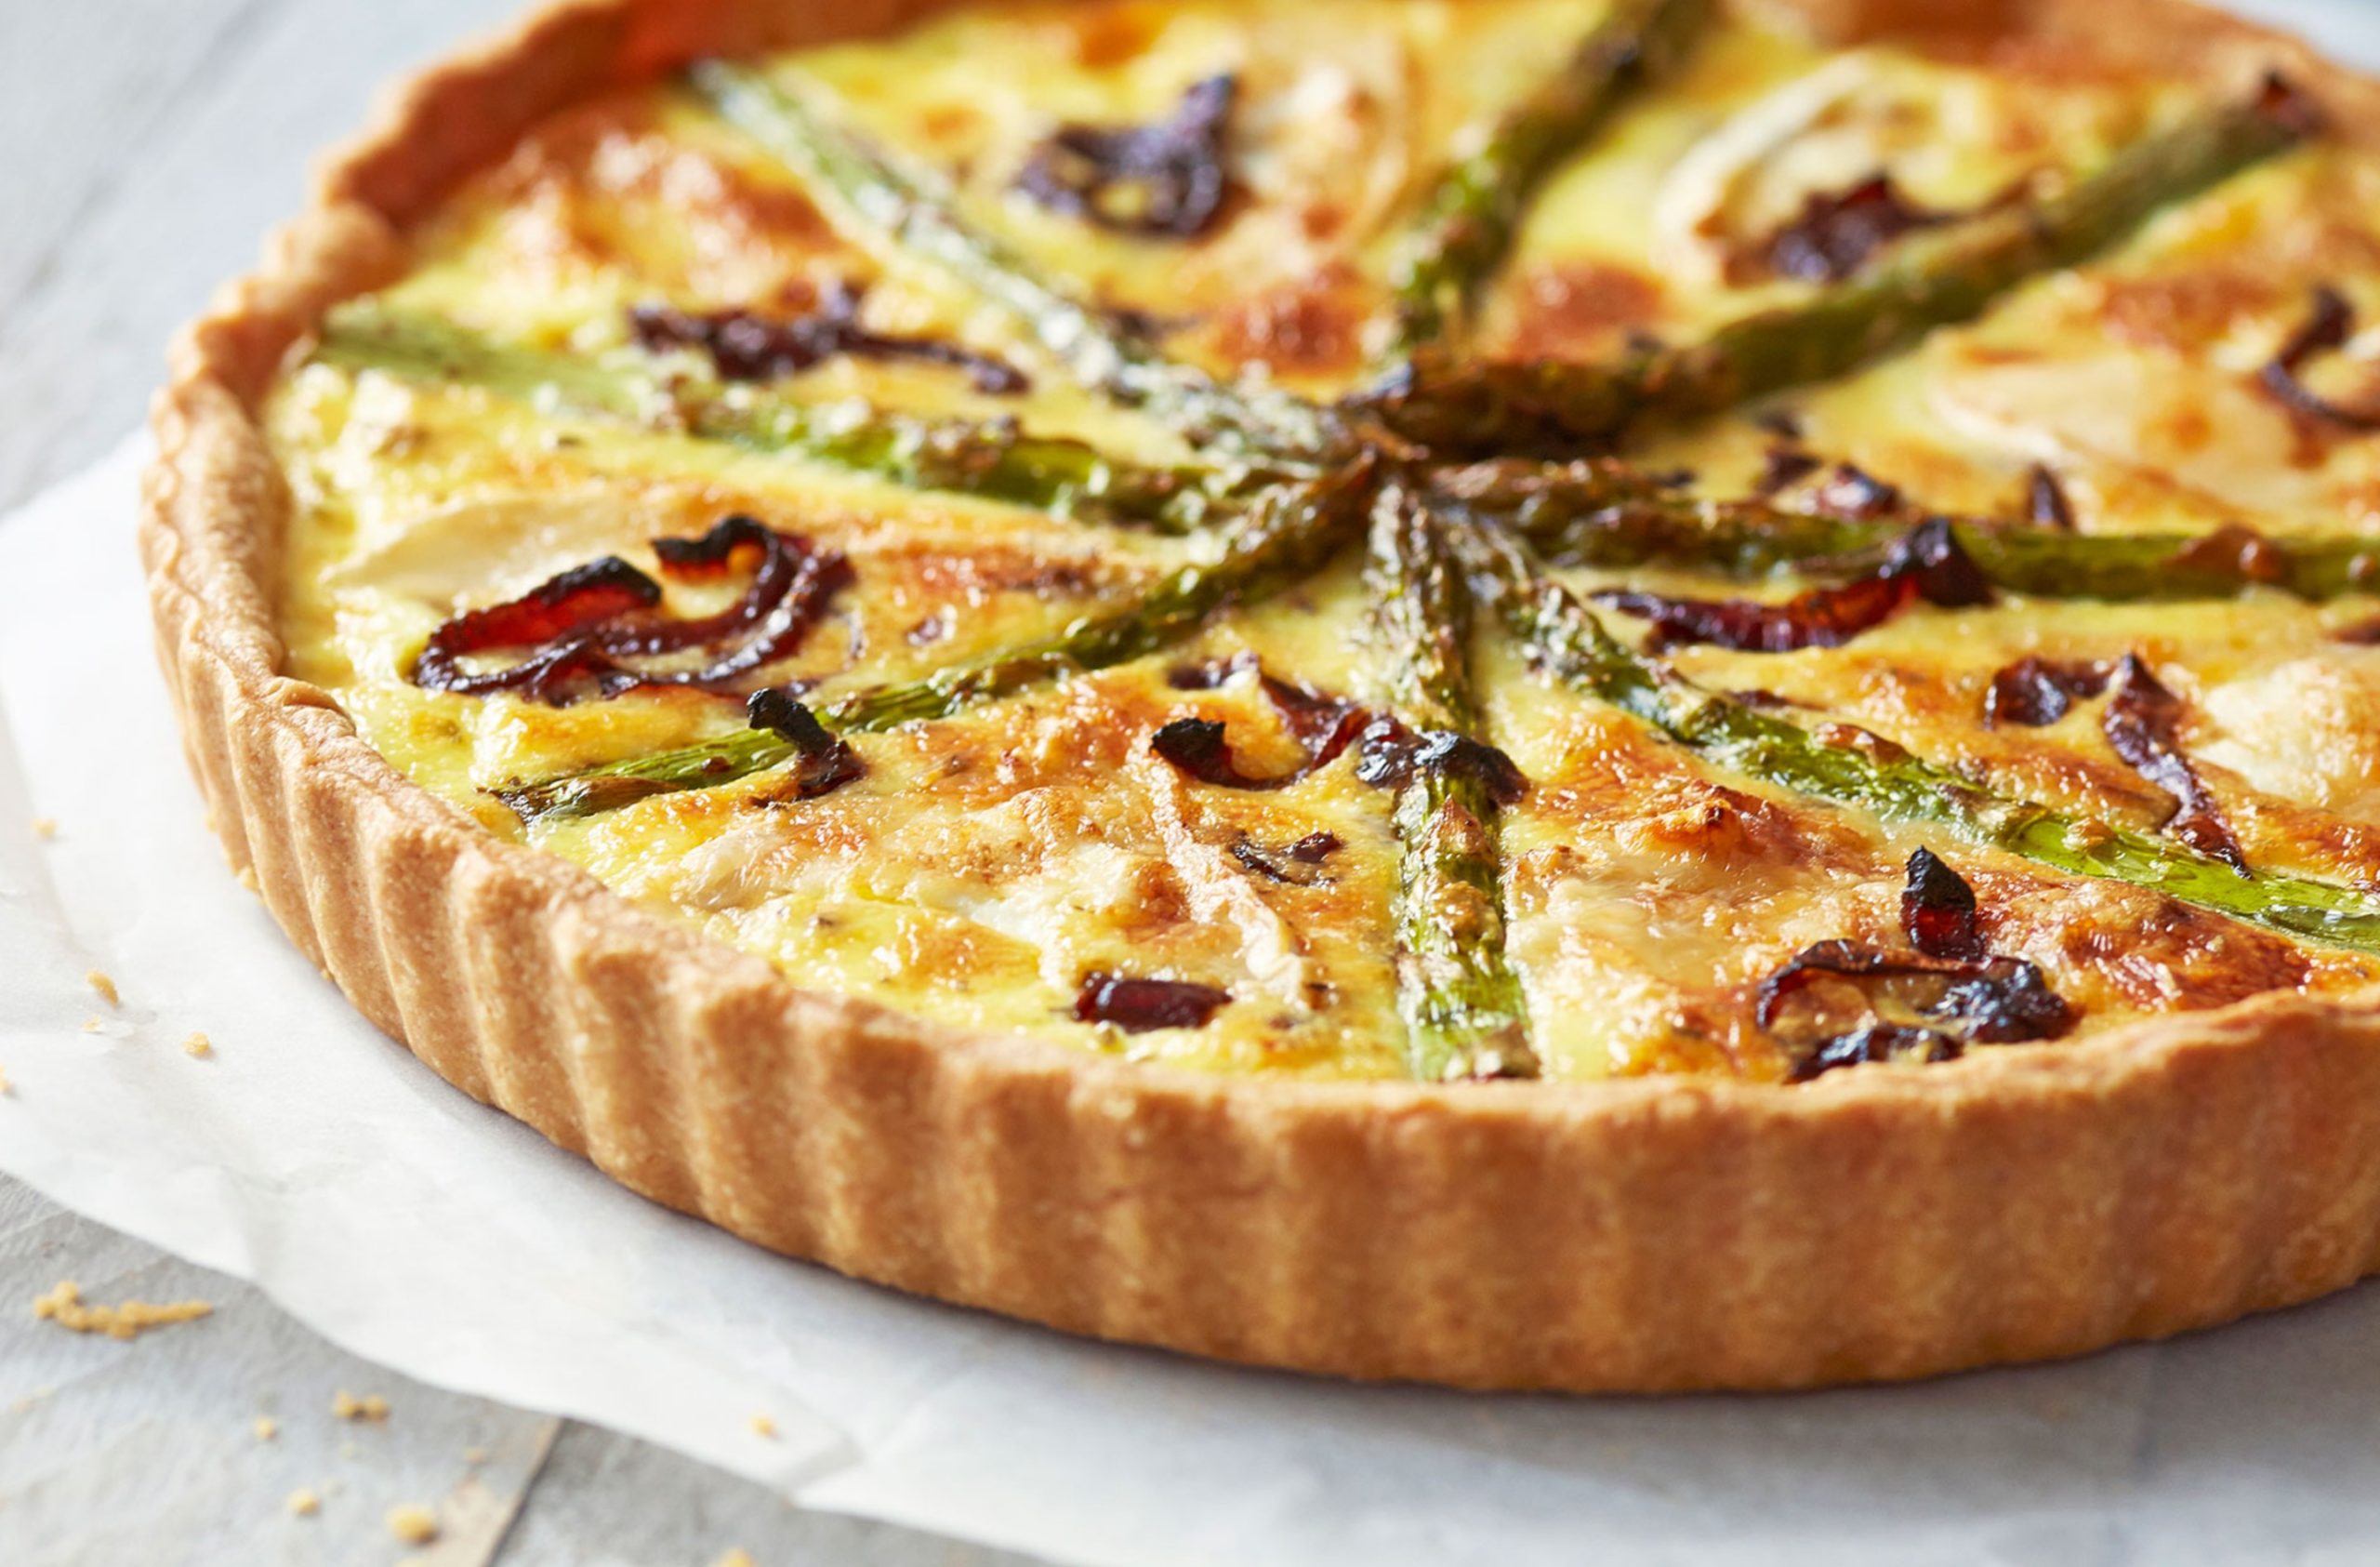 Asparagus, Gruyere and Sun Soaked Tomato Quiche - Second Helpings